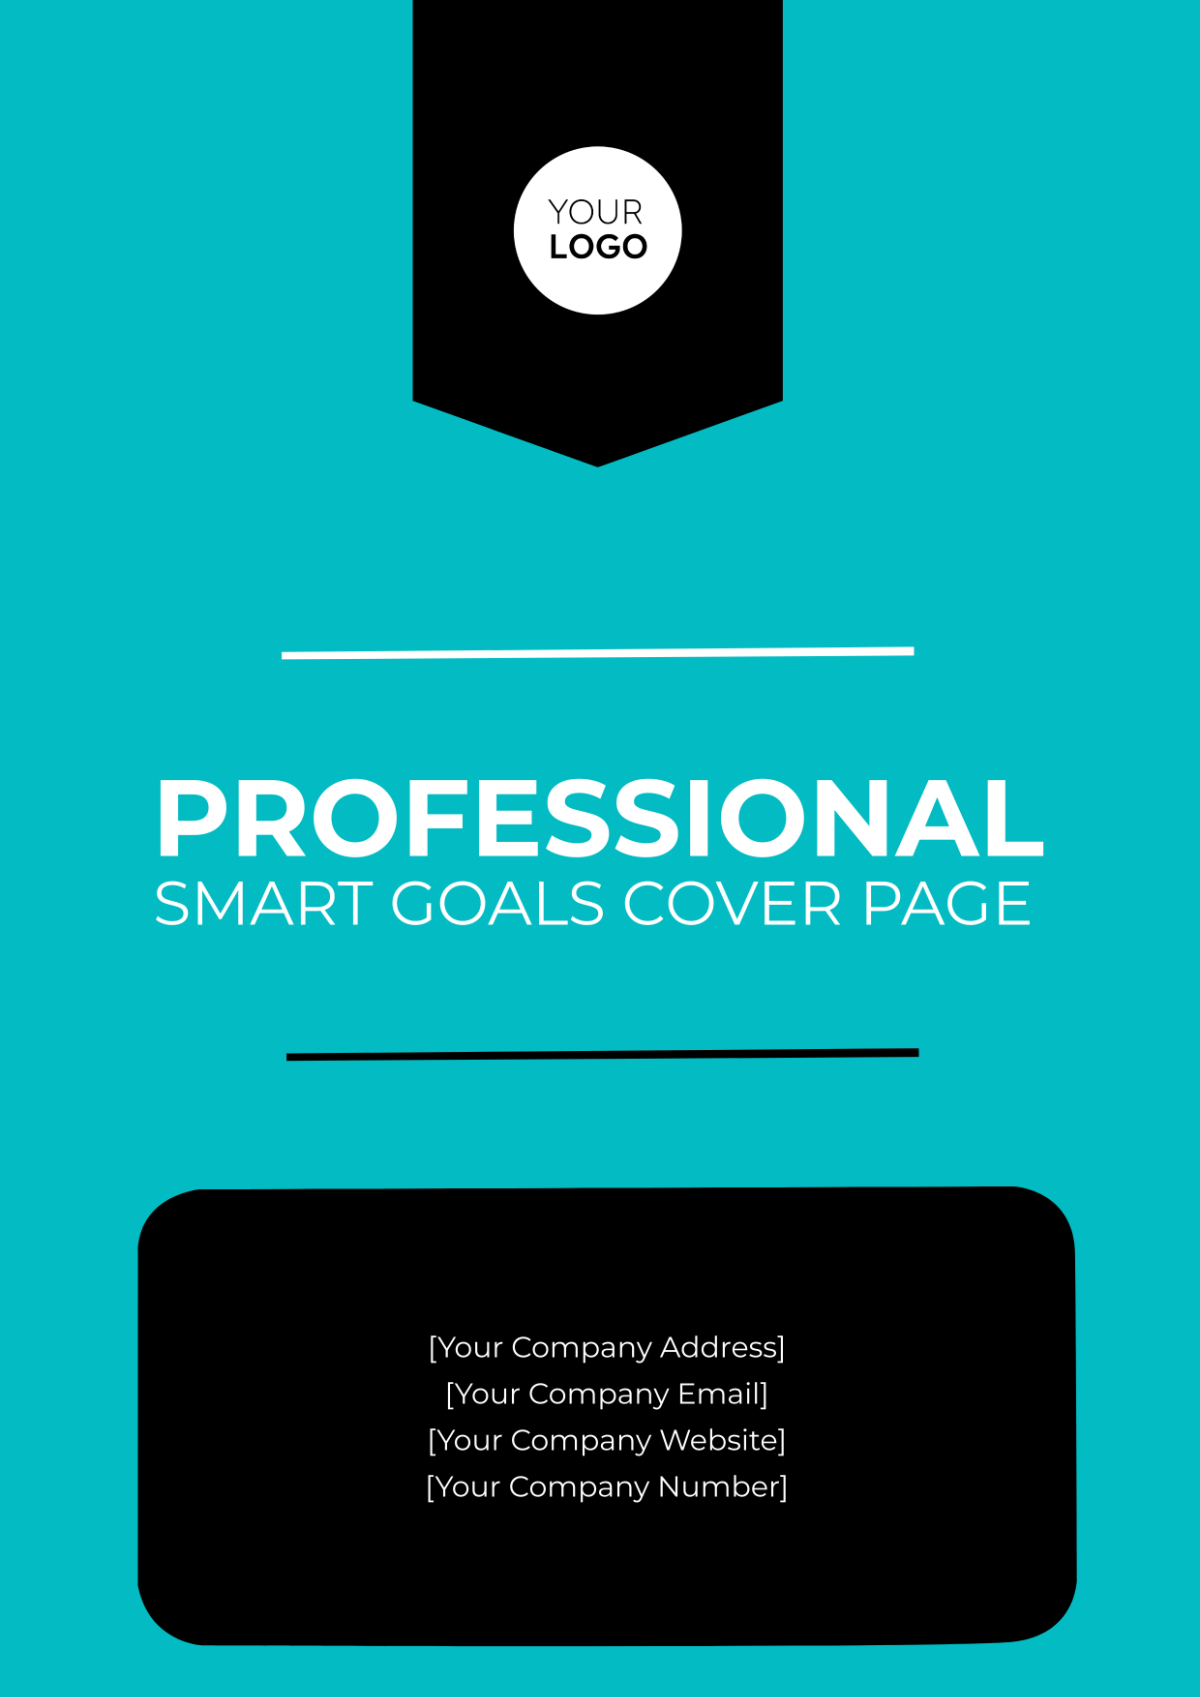 Professional SMART Goals Cover Page